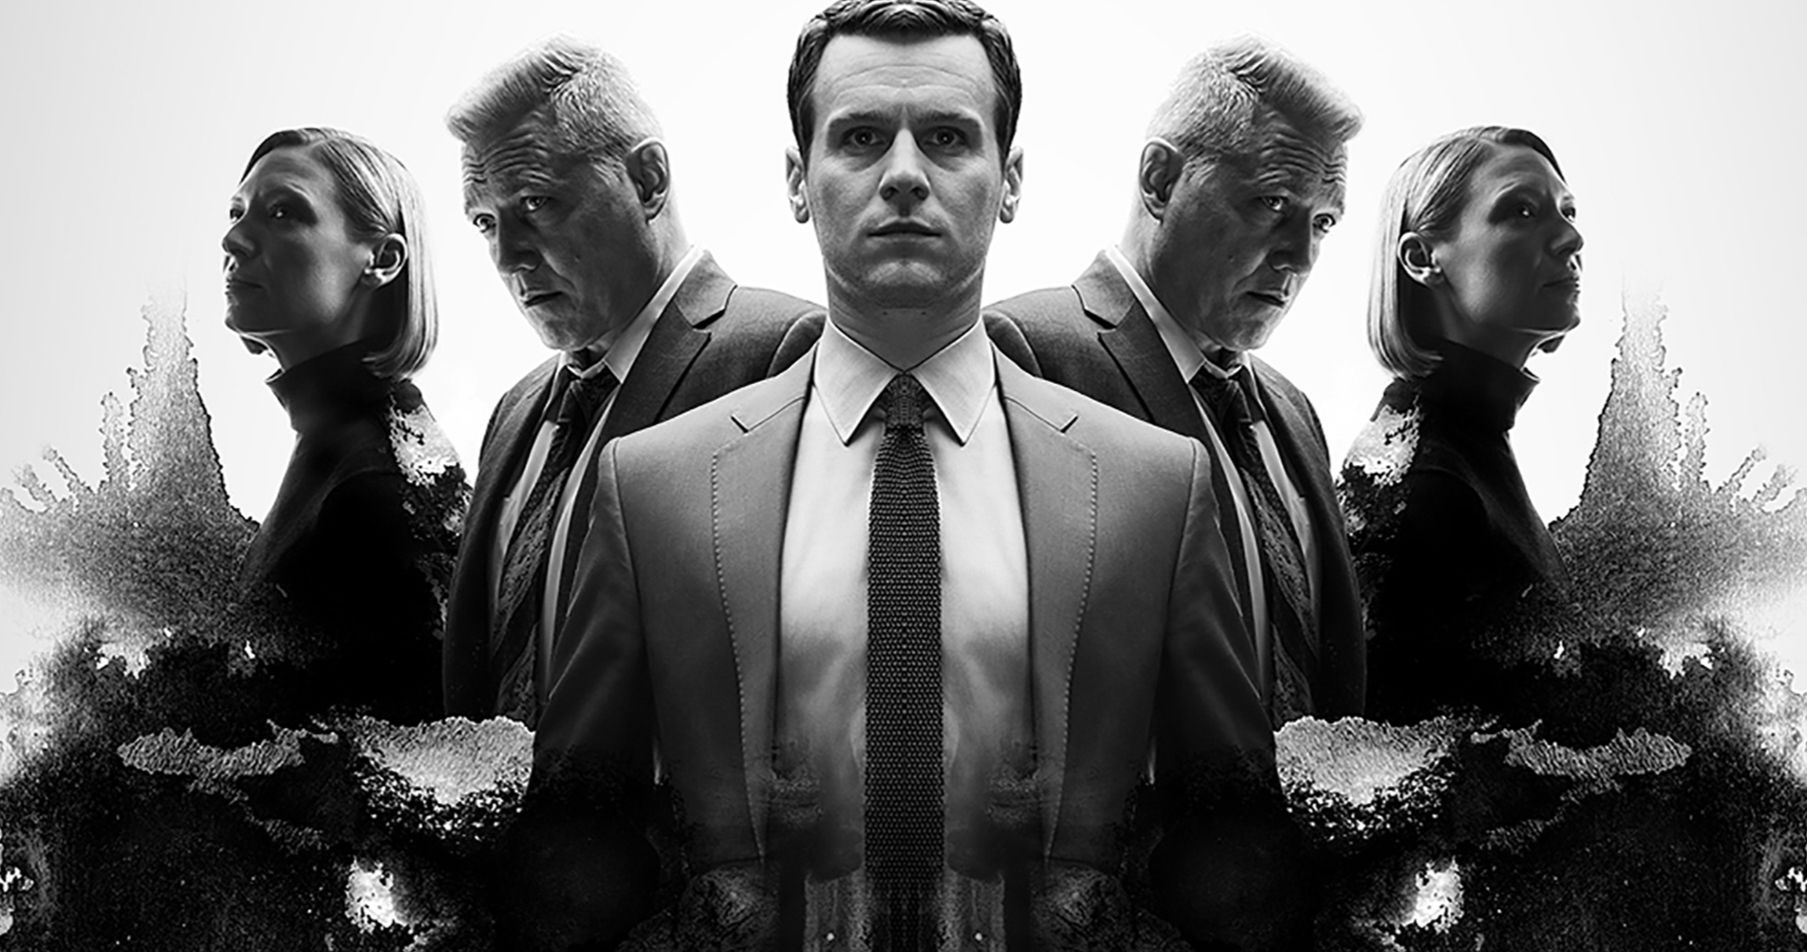 Mindhunter Season 3 Put on Hold Until David Fincher Finishes His New Movie